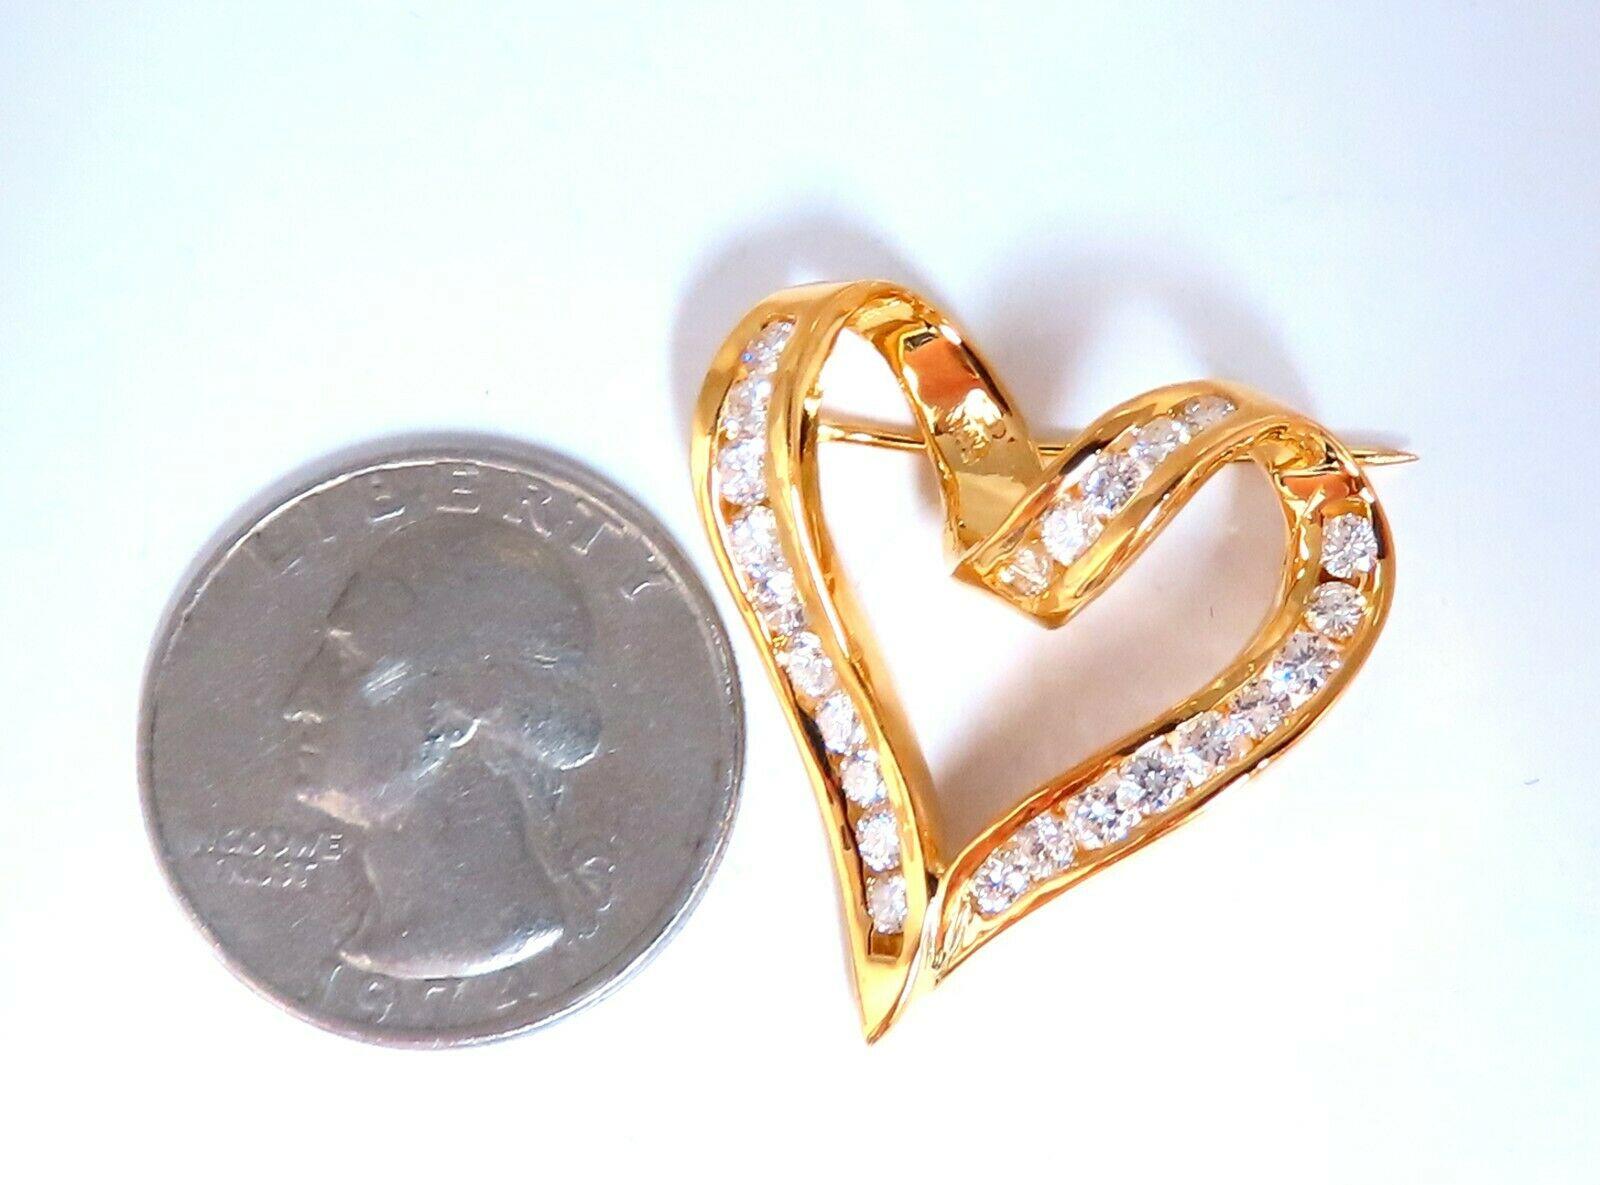 1.10ct. diamonds Heart brooch pin.

Rounds, Full cut Brilliant.

G-color Vs-1 Vs-2  clarity.

14kt yellow gold 

8.6 grams.

Overall: 1.1 X 1 inch

Excellent made 

Gorgeous Details

$5,500 Appraisal Certificate to accompany.